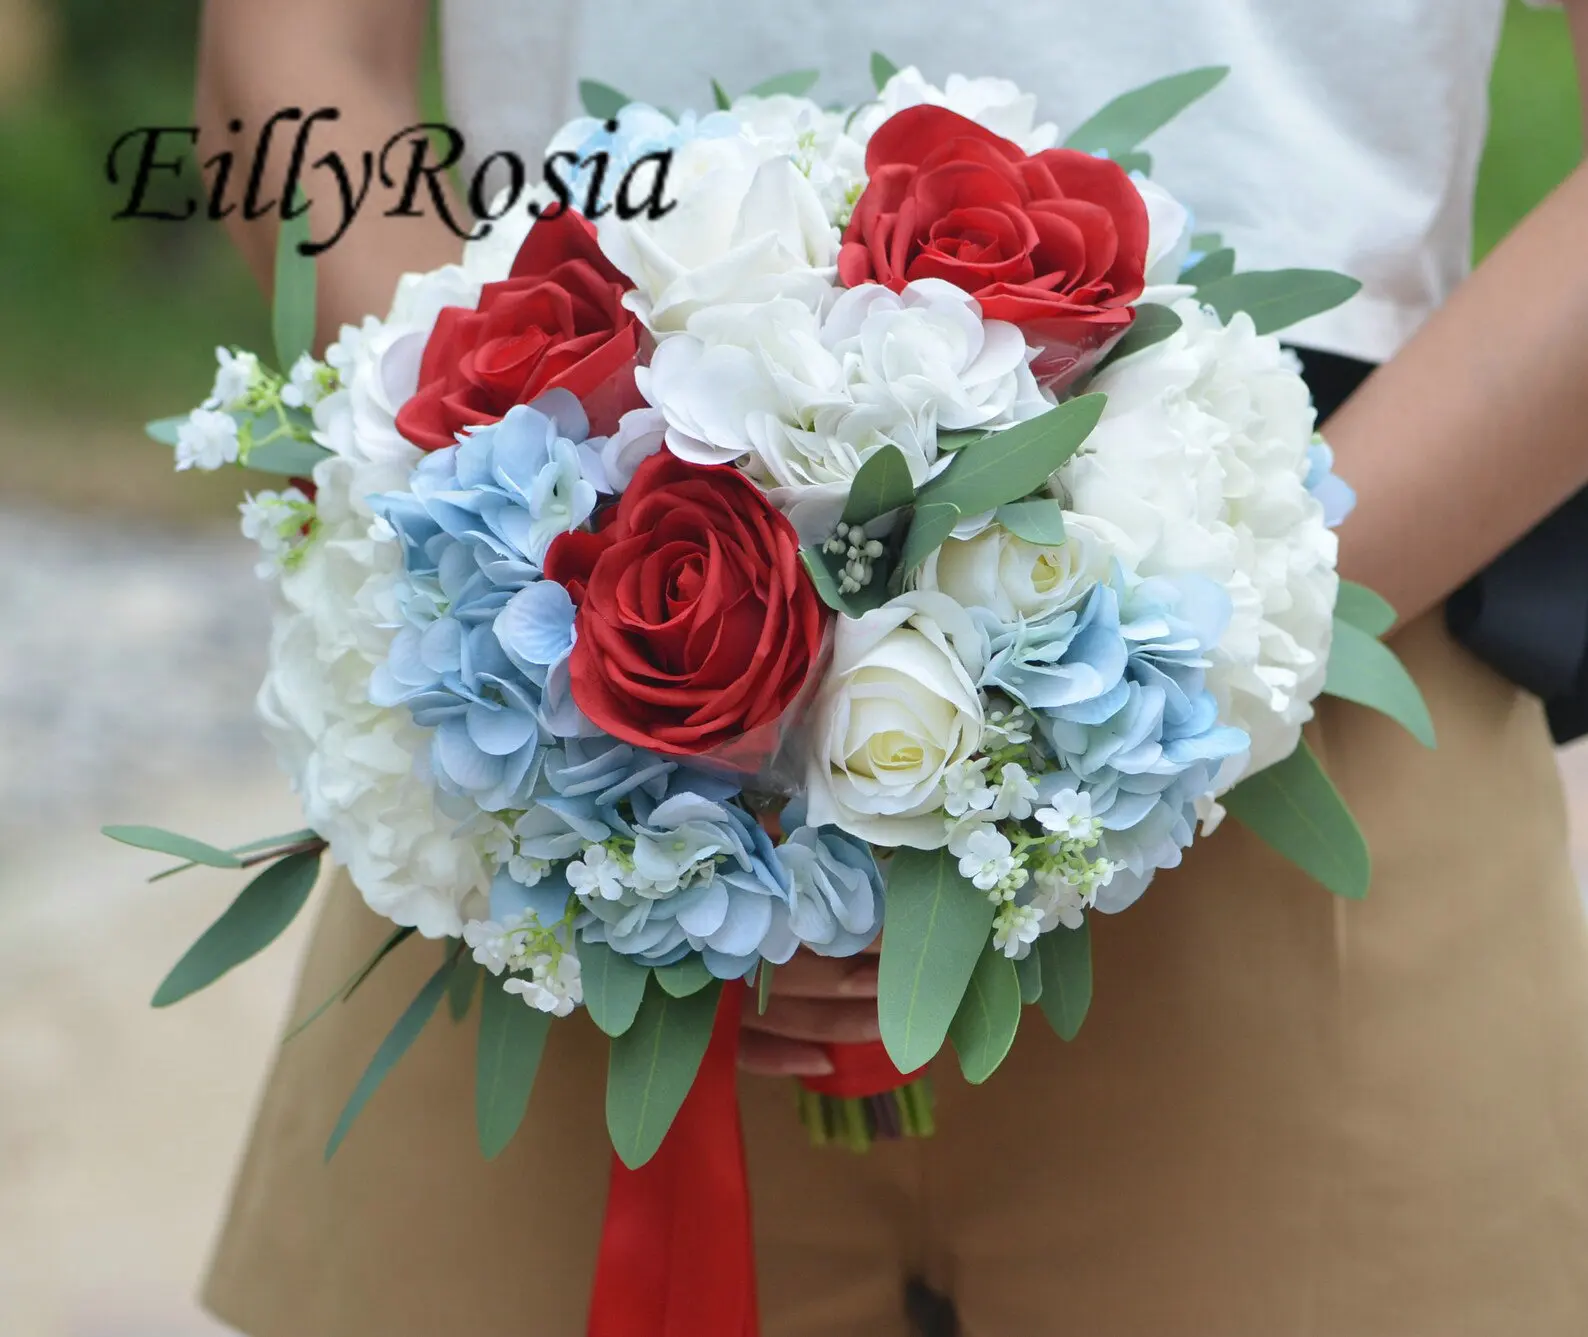 

EillyRosia Light Blue Hydrangea Red Roses White Peony Rustic Bridal Bouquet Artificial Hand Holding Beach Wedding Flowers Bride